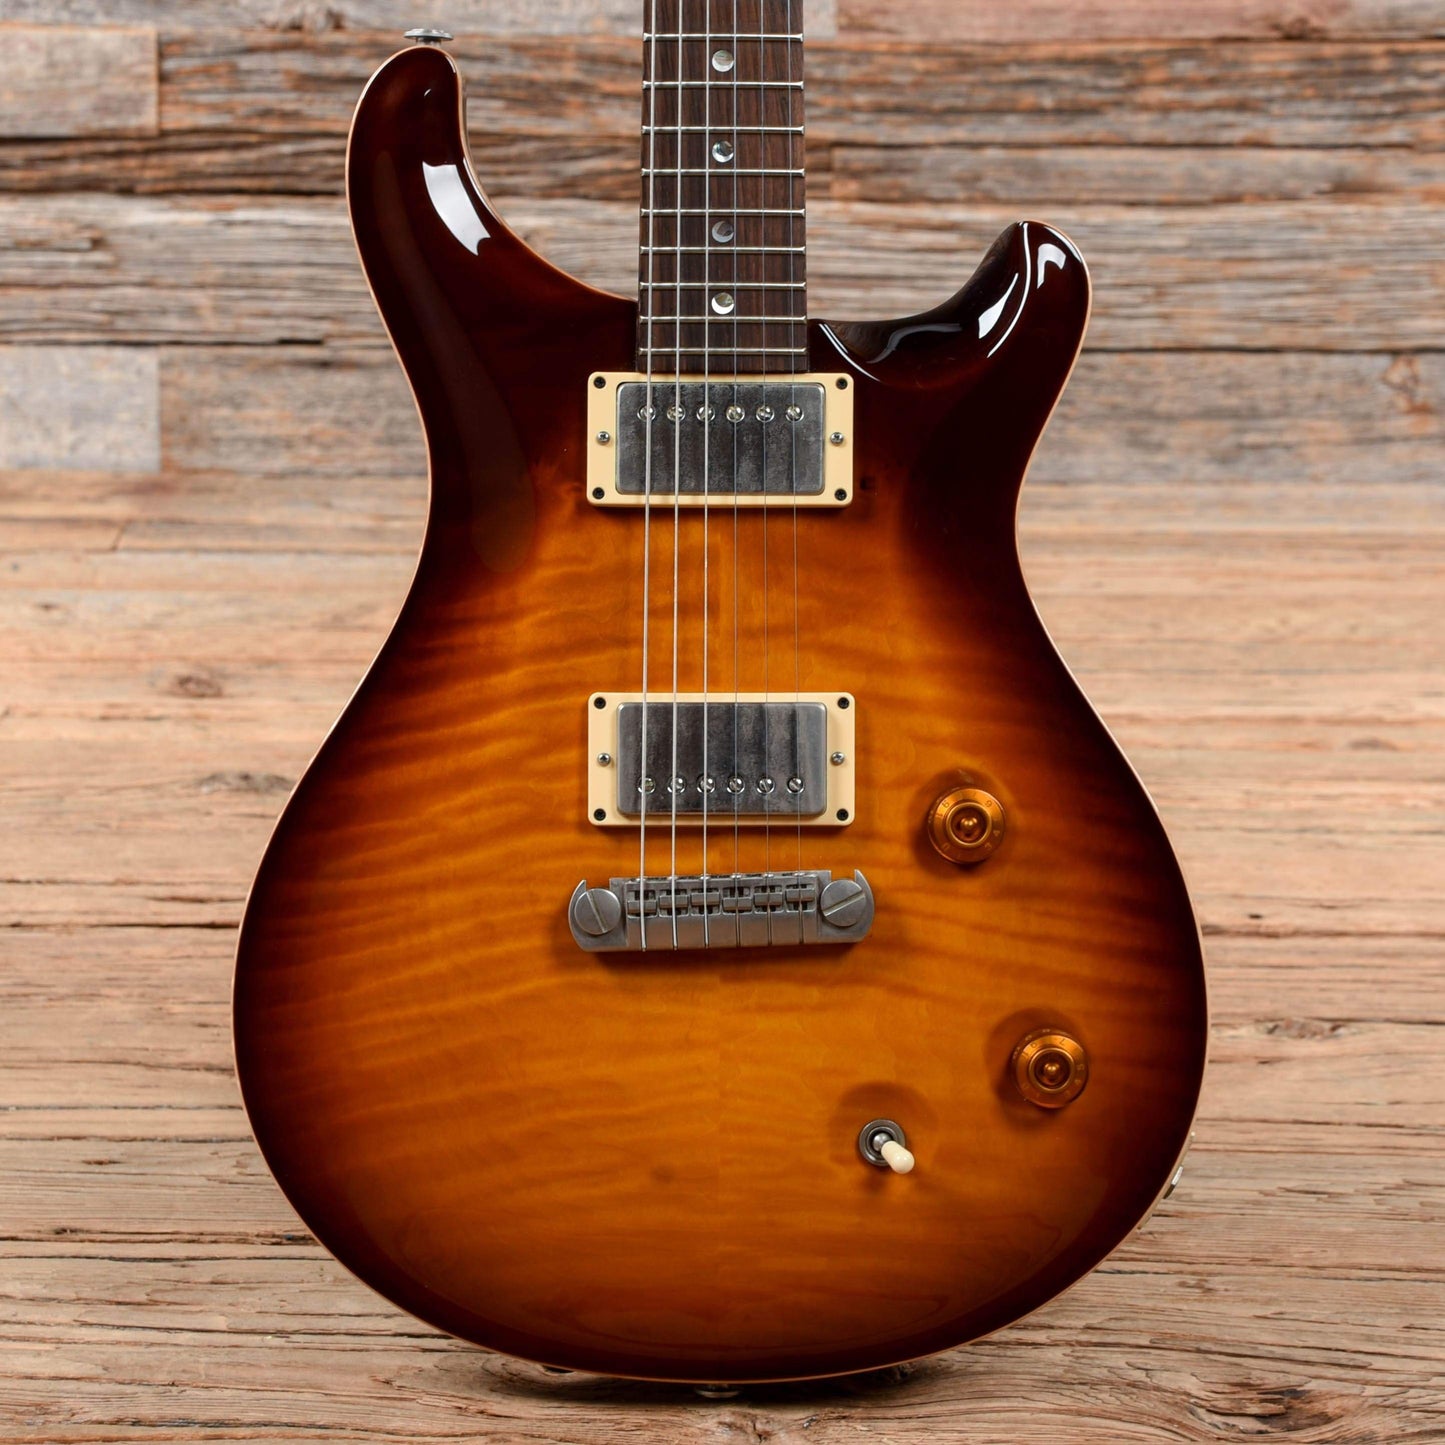 PRS McCarty w/Solid Brazilian Rosewood Neck #155 of 250 McCarty Sunburst 2009 Electric Guitars / Solid Body